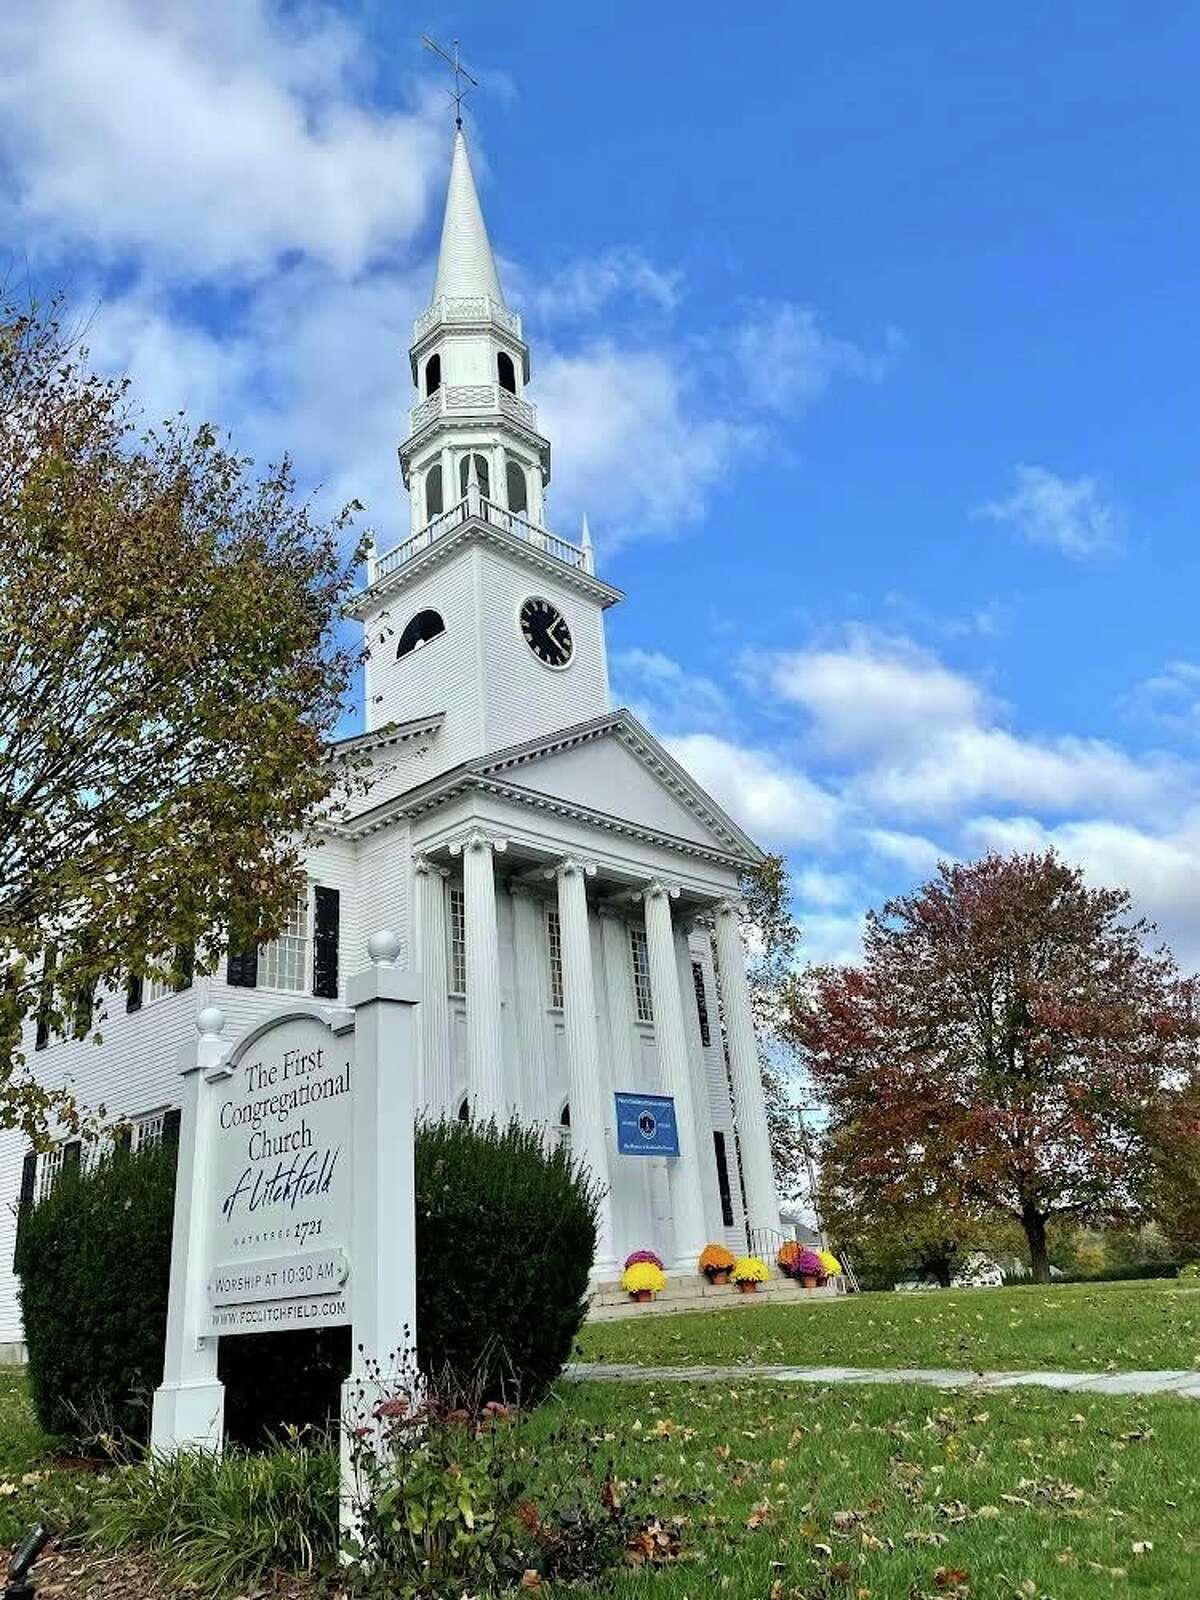 The First Congregational Church of Litchfield celebrates its 300th anniversary on Nov. 6.